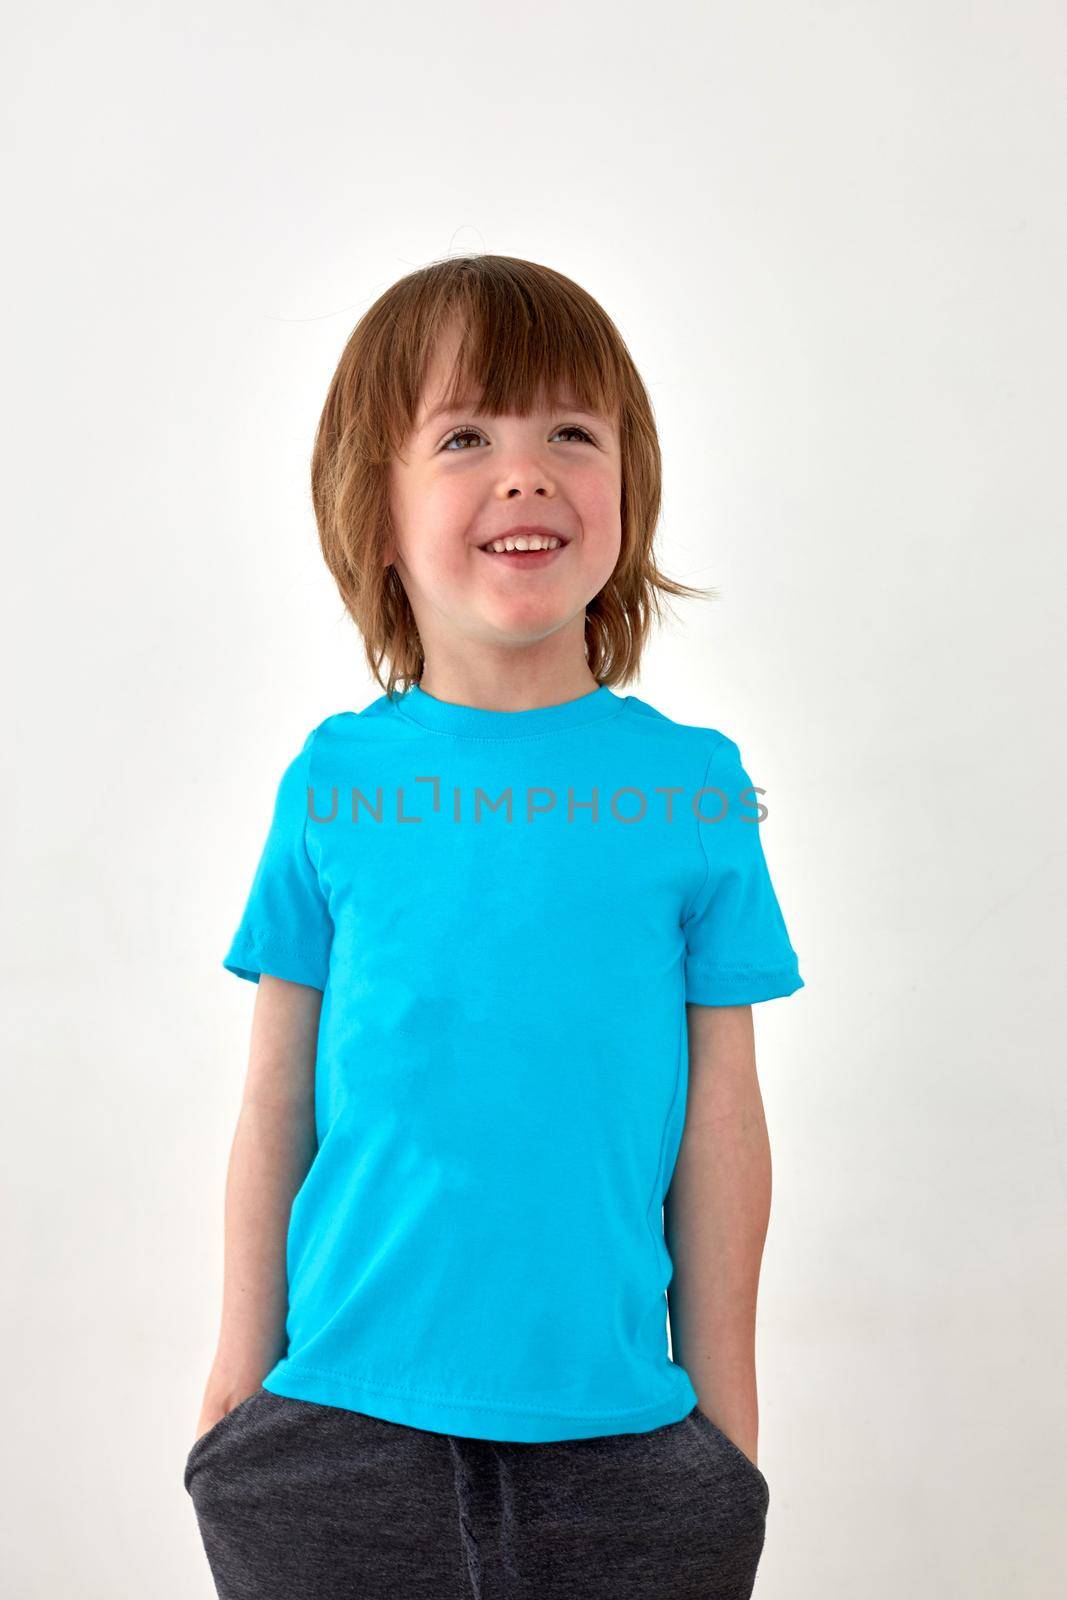 Glad young boy in blue t shirt standing against white background and looking away